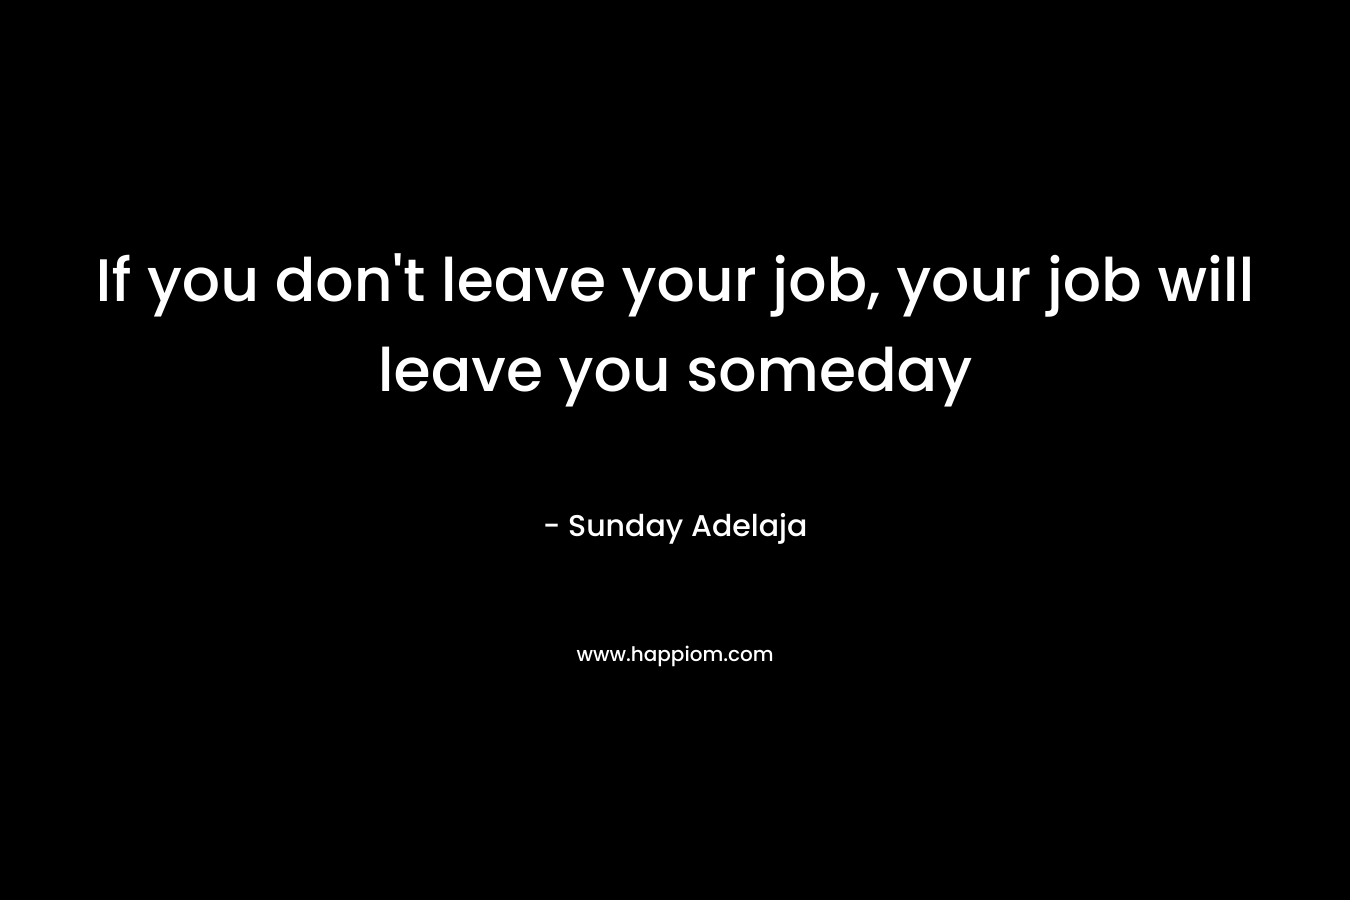 If you don't leave your job, your job will leave you someday